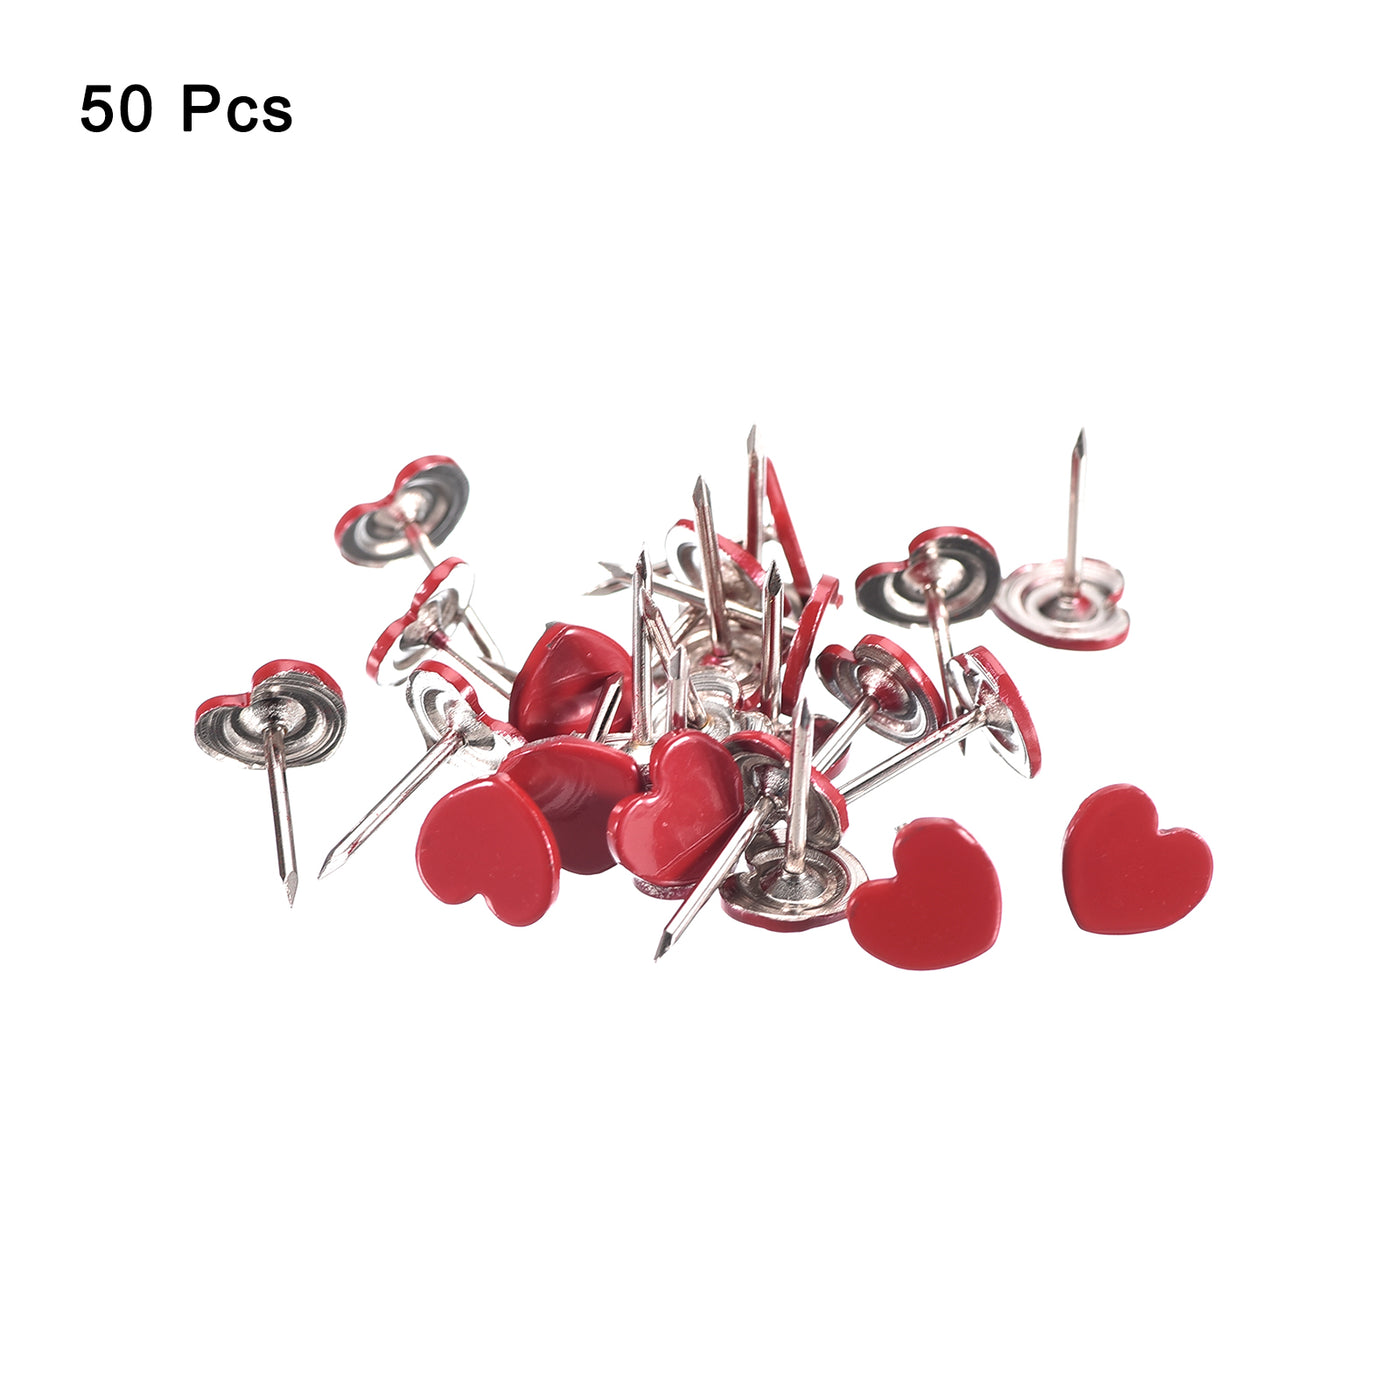 uxcell Uxcell 50Pcs Heart Shape Push Pins Decorative Thumbtacks for Cork Board, Red